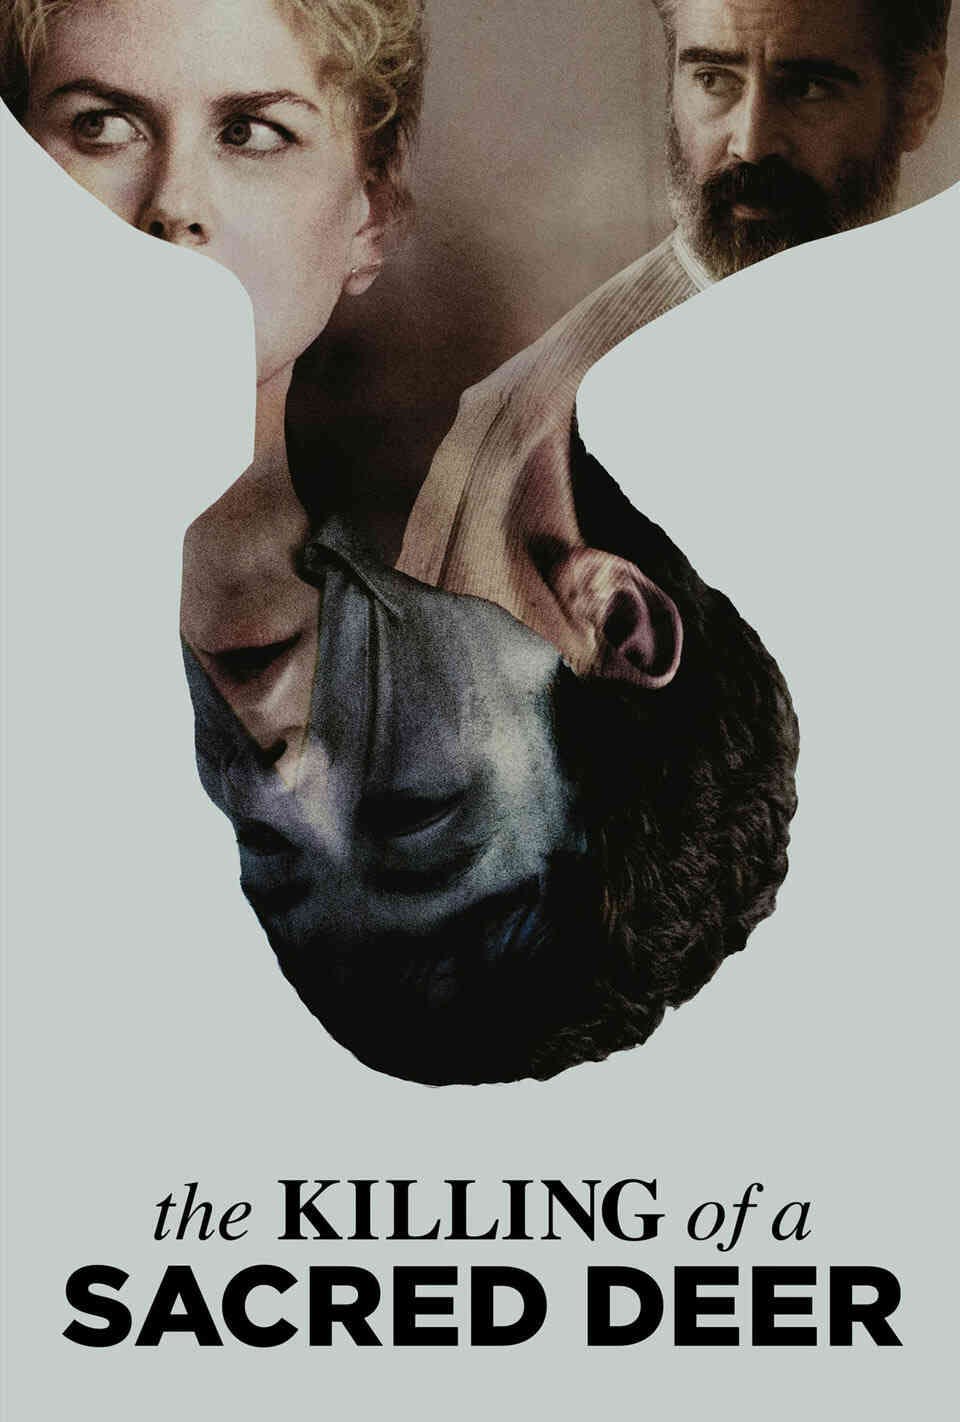 Read The Killing of a Sacred Deer screenplay (poster)